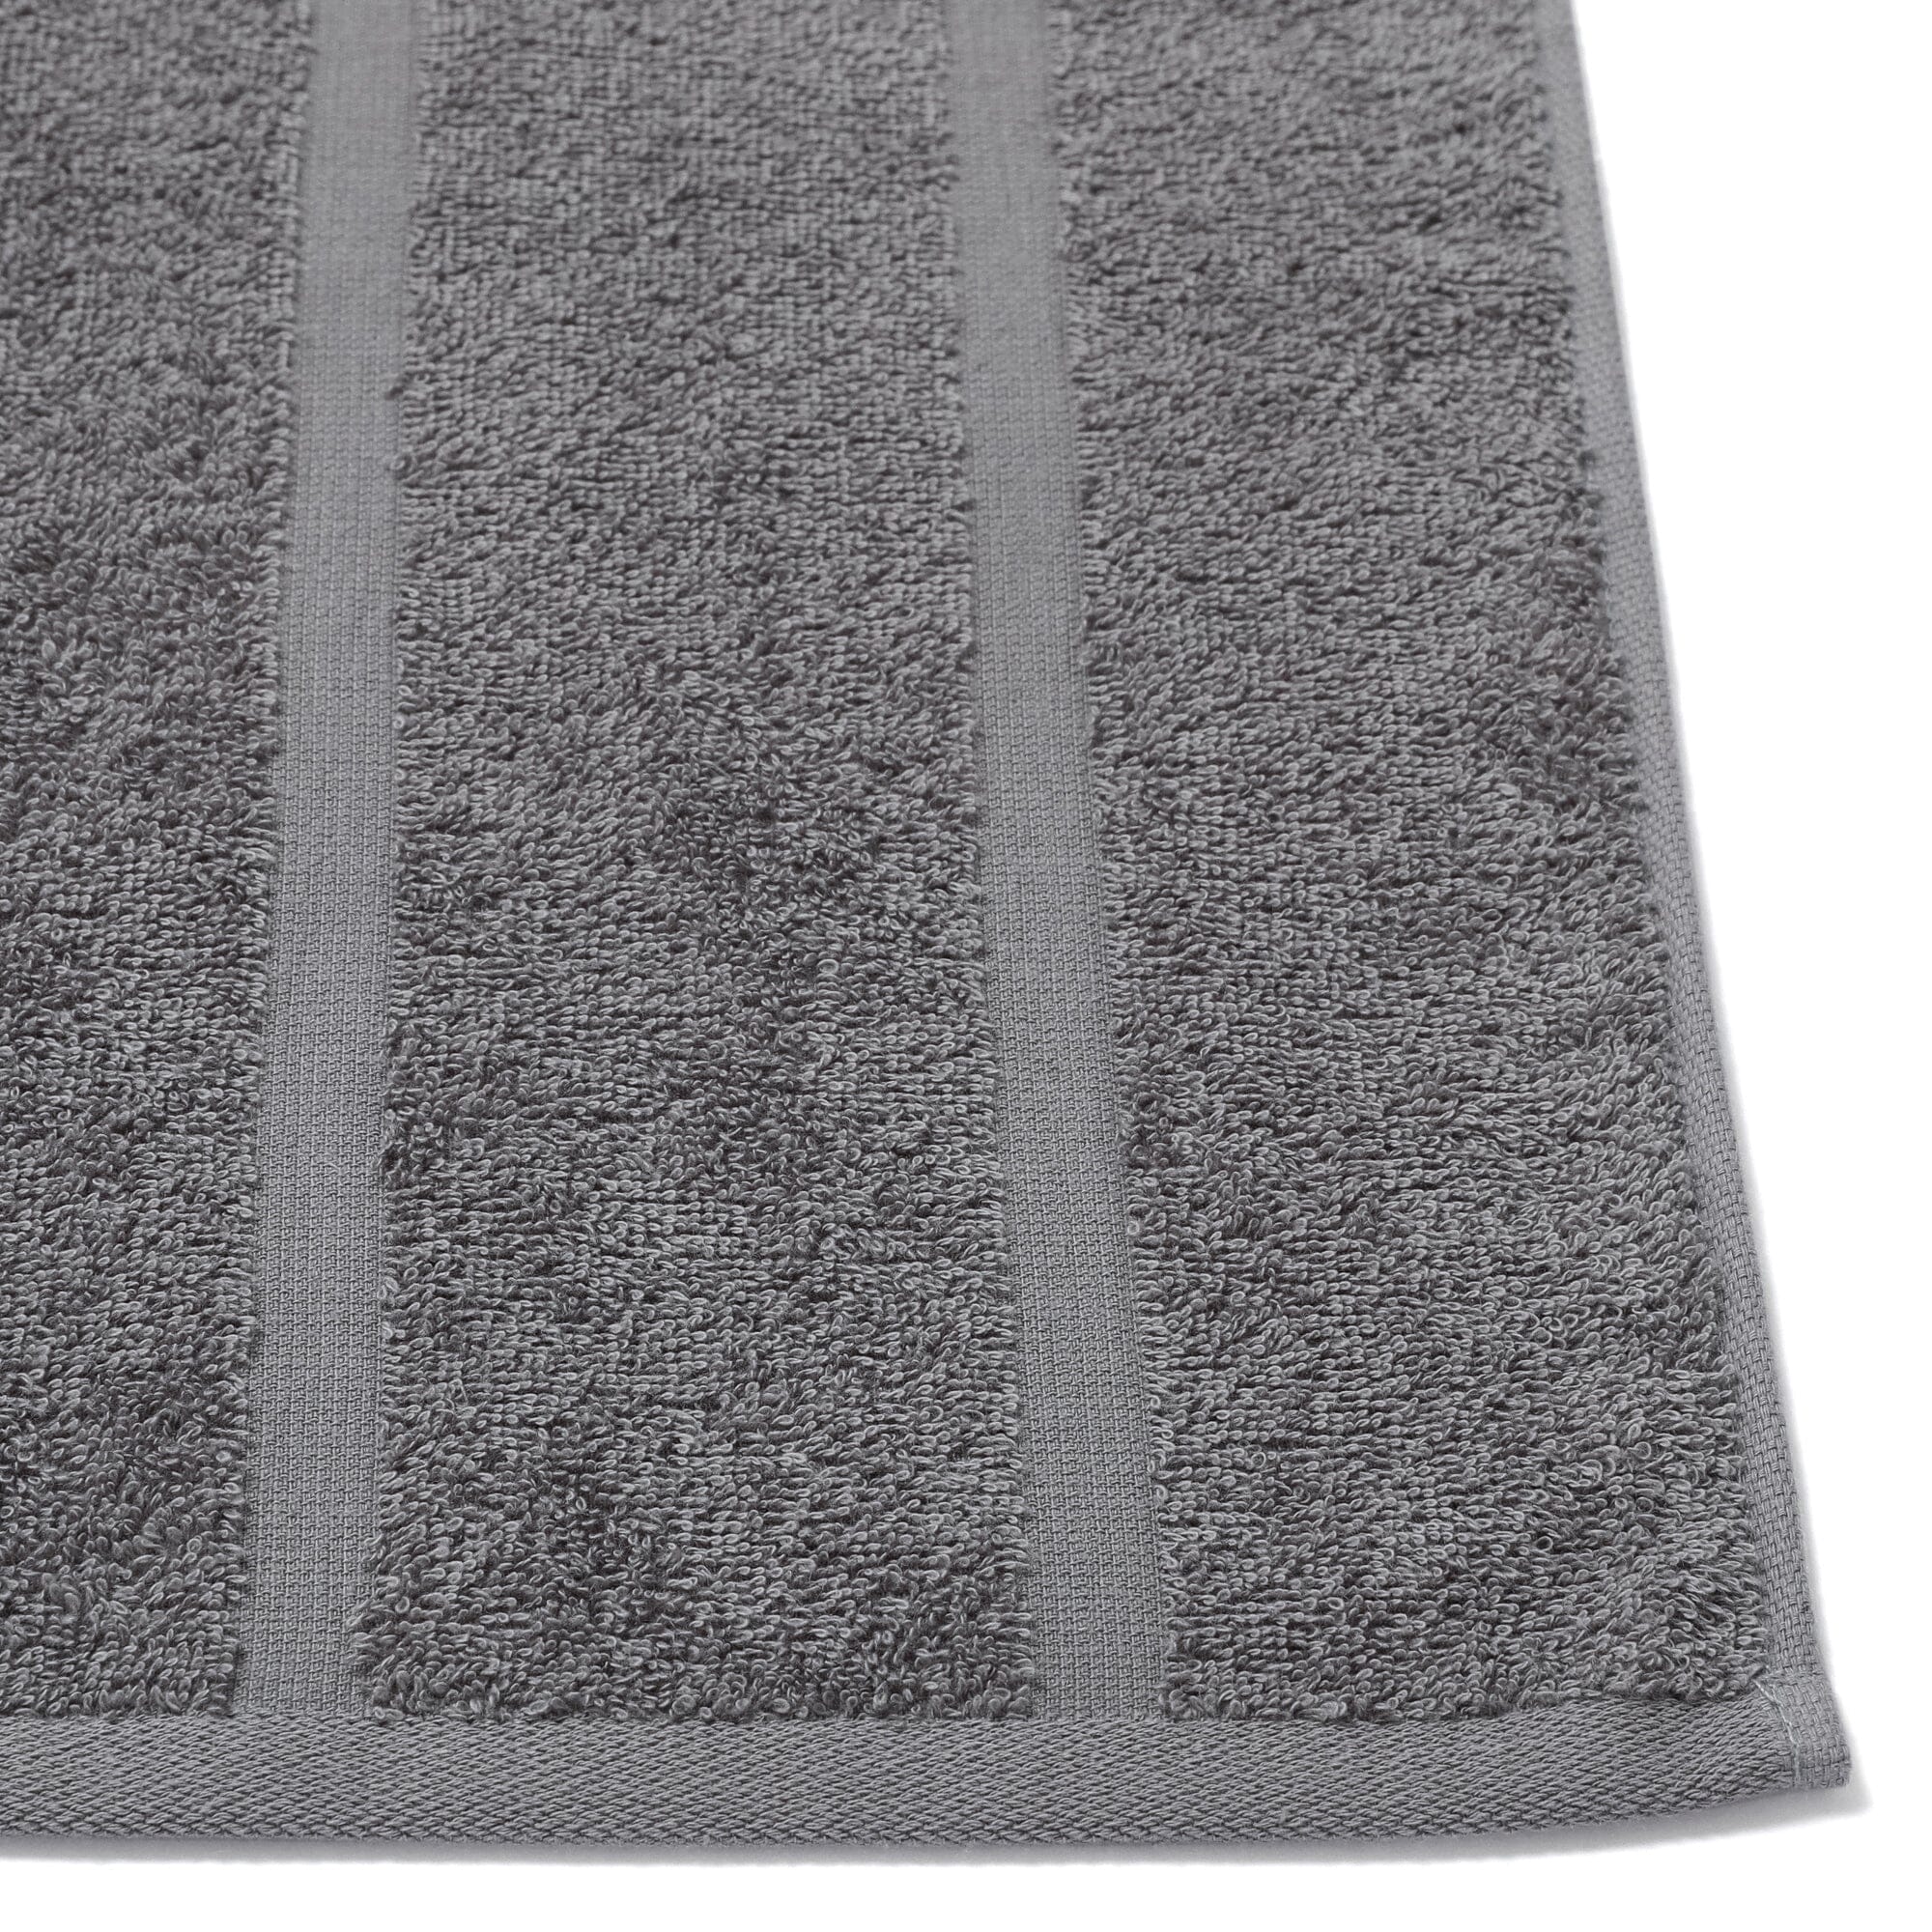 Vale Face Towel Star Gy